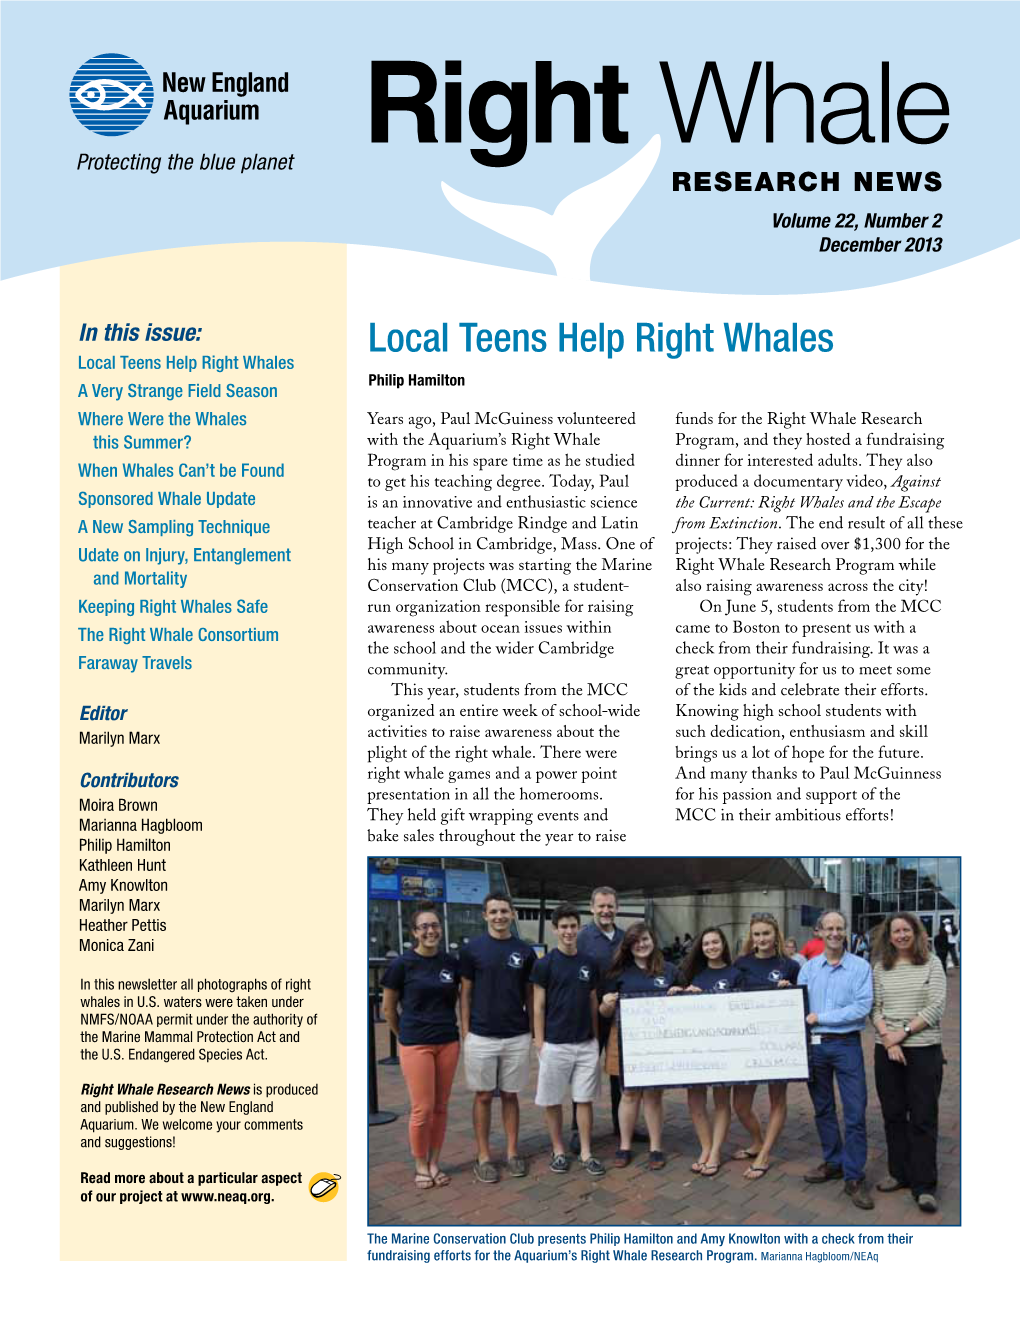 Local Teens Help Right Whales